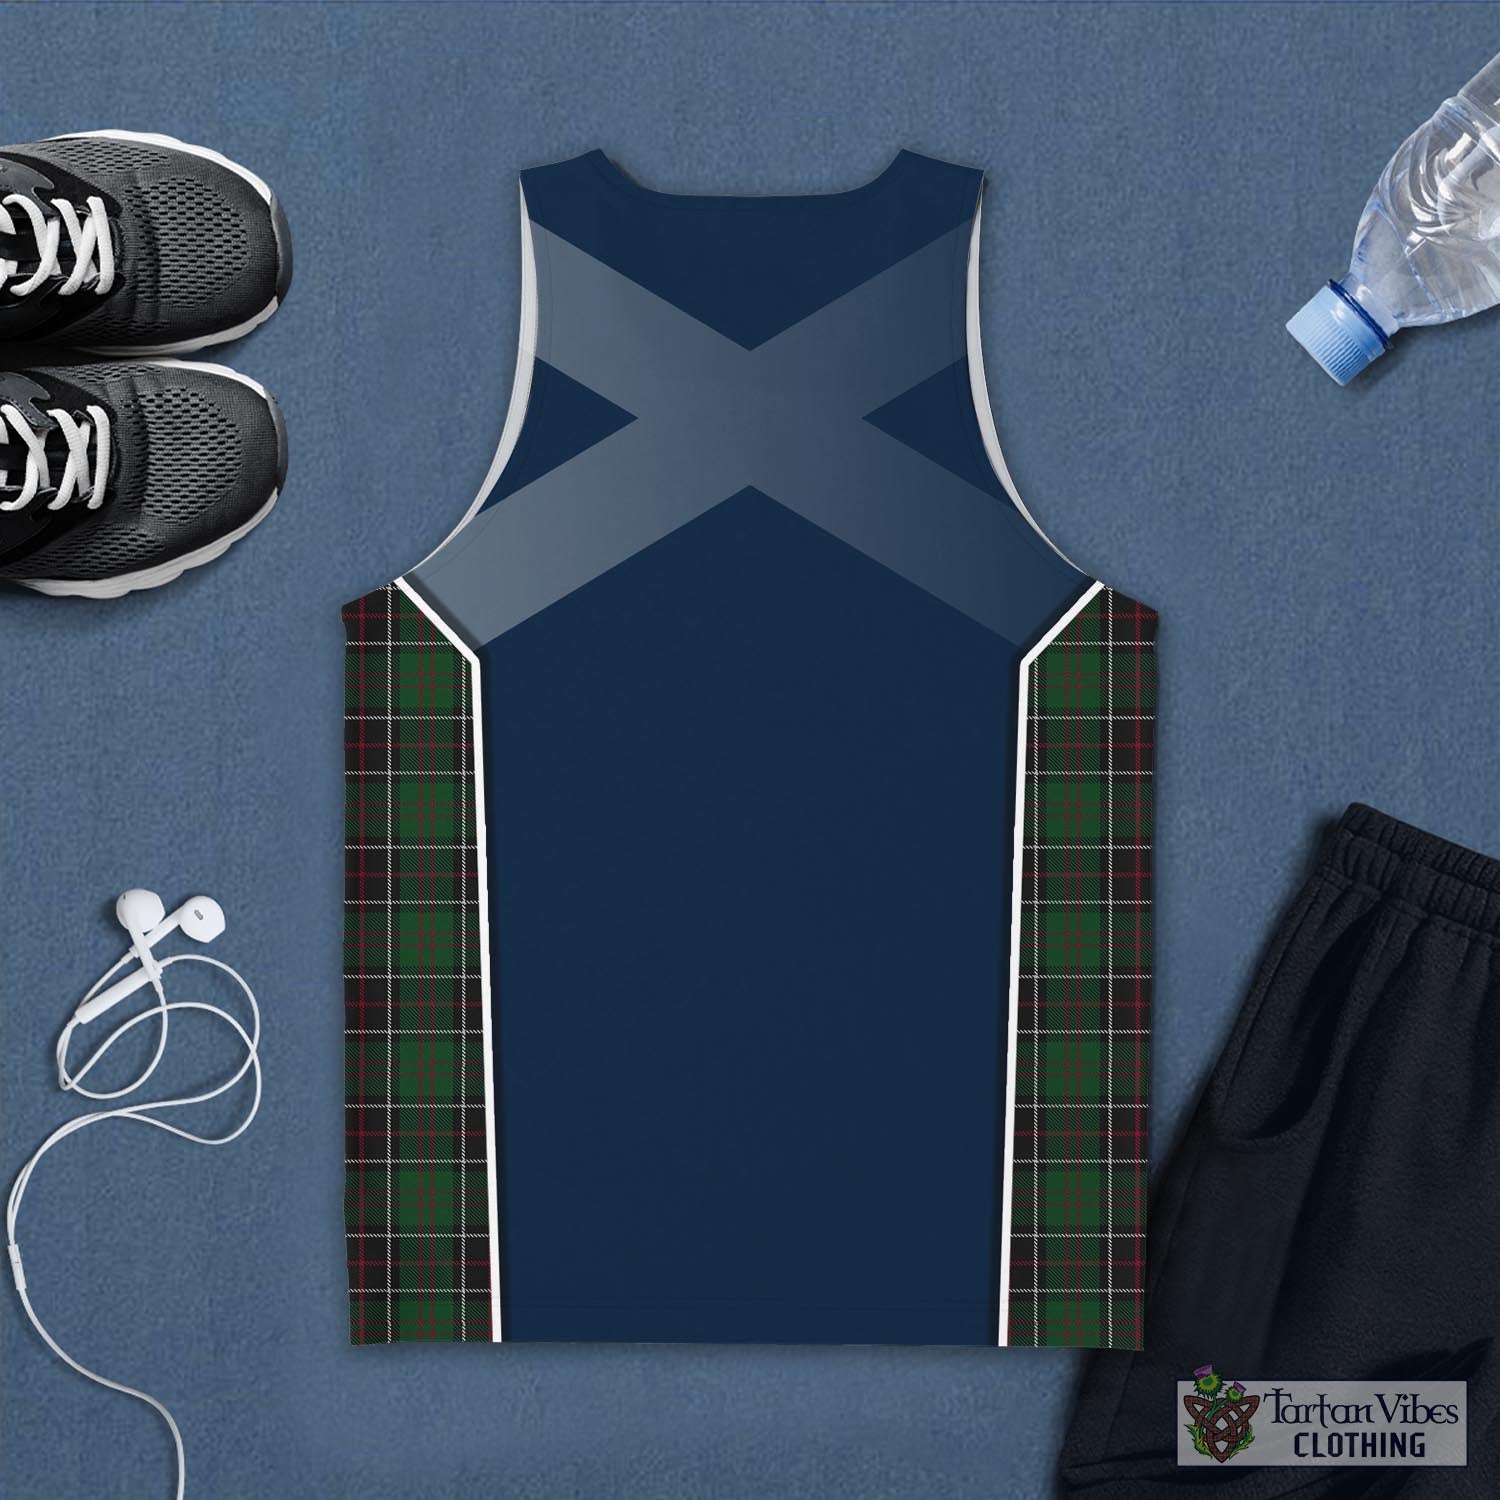 Tartan Vibes Clothing Sinclair Hunting Tartan Men's Tanks Top with Family Crest and Scottish Thistle Vibes Sport Style